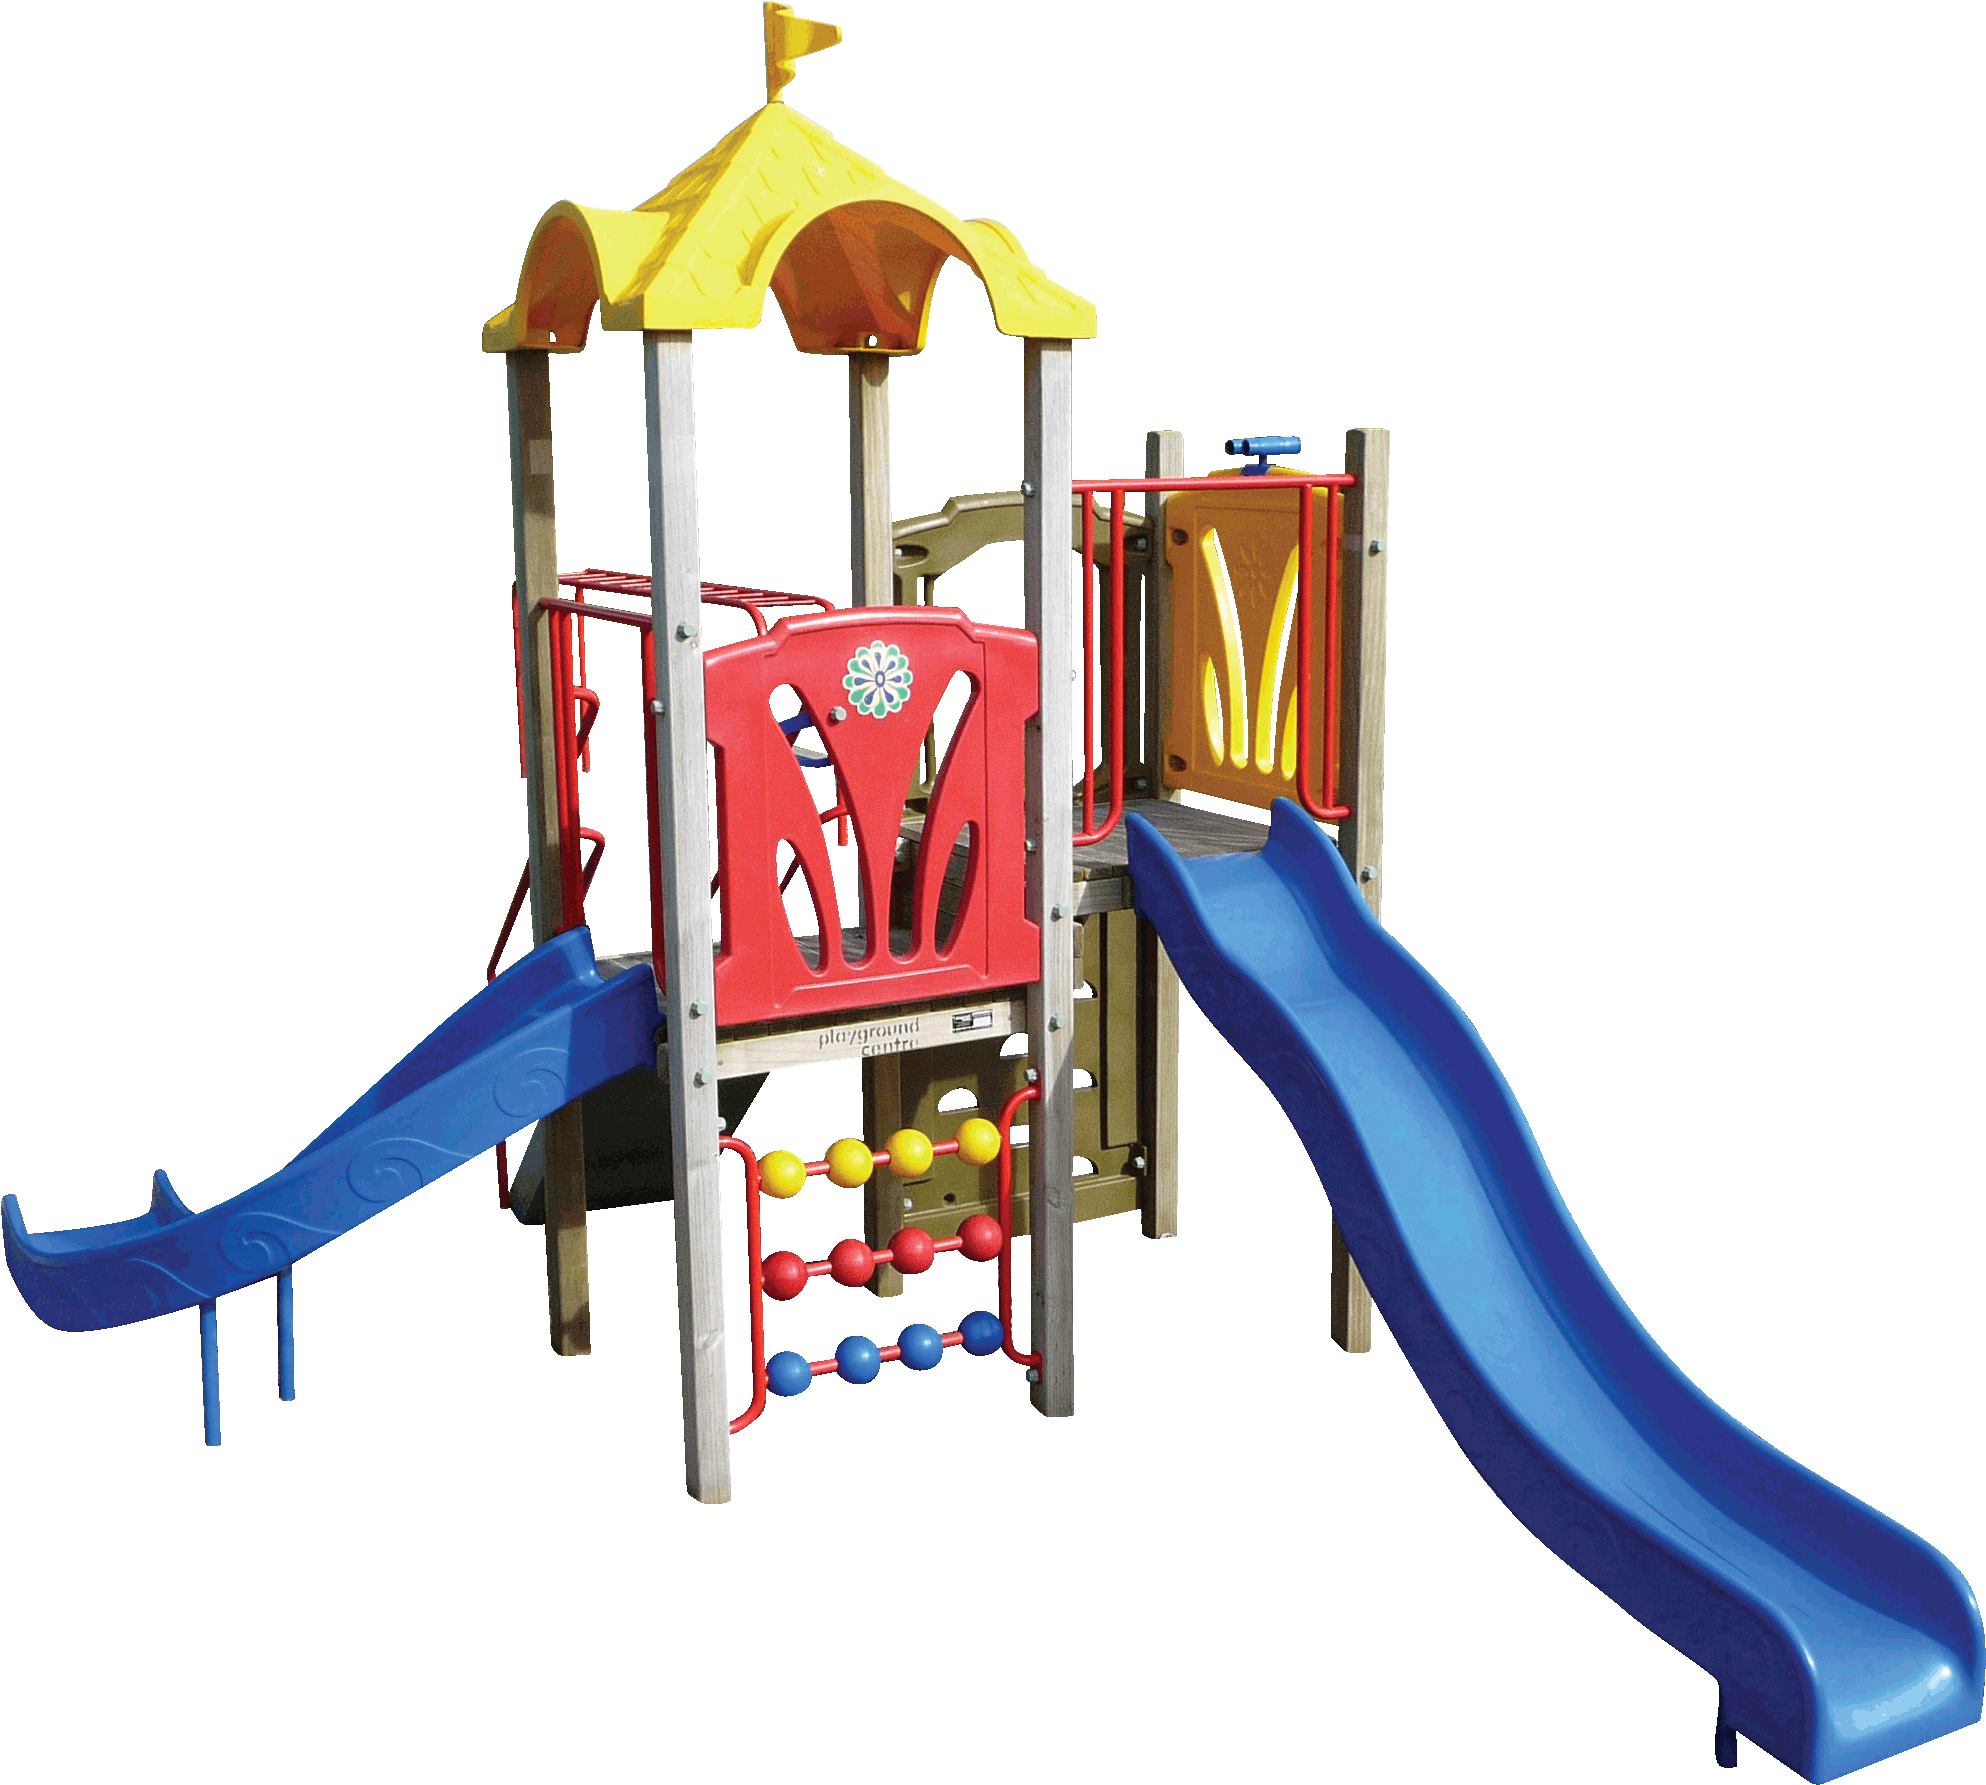 A Colorful Playground With A Slide